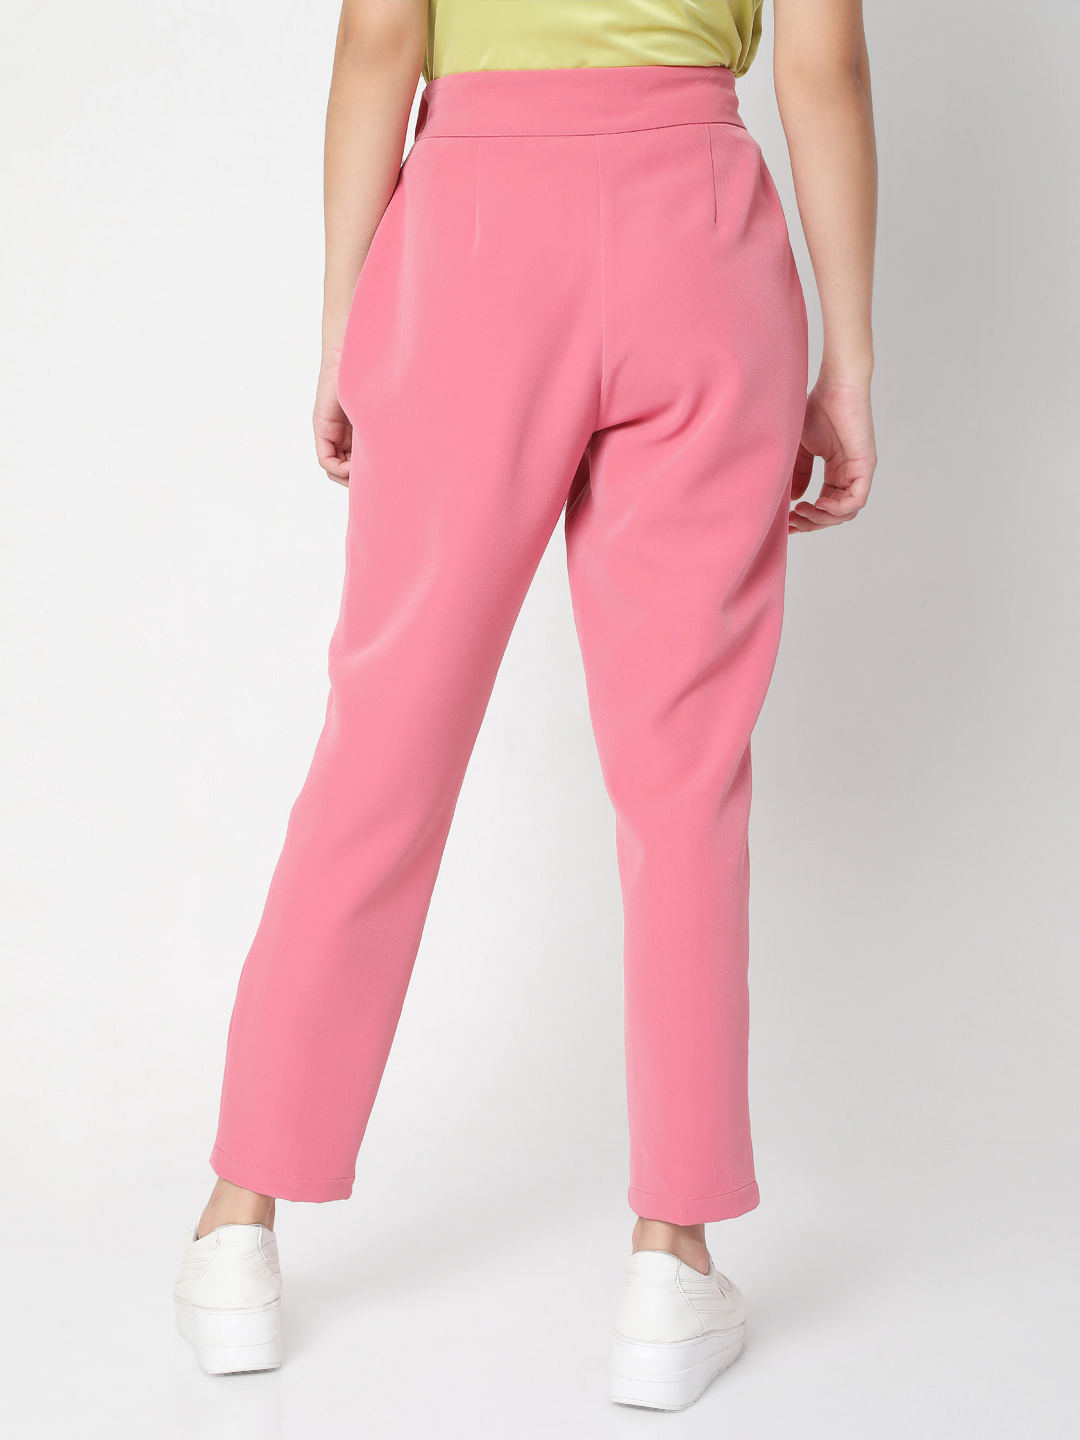 My Desire Pink Tailored Cigarette Trousers  Club L London  IRE